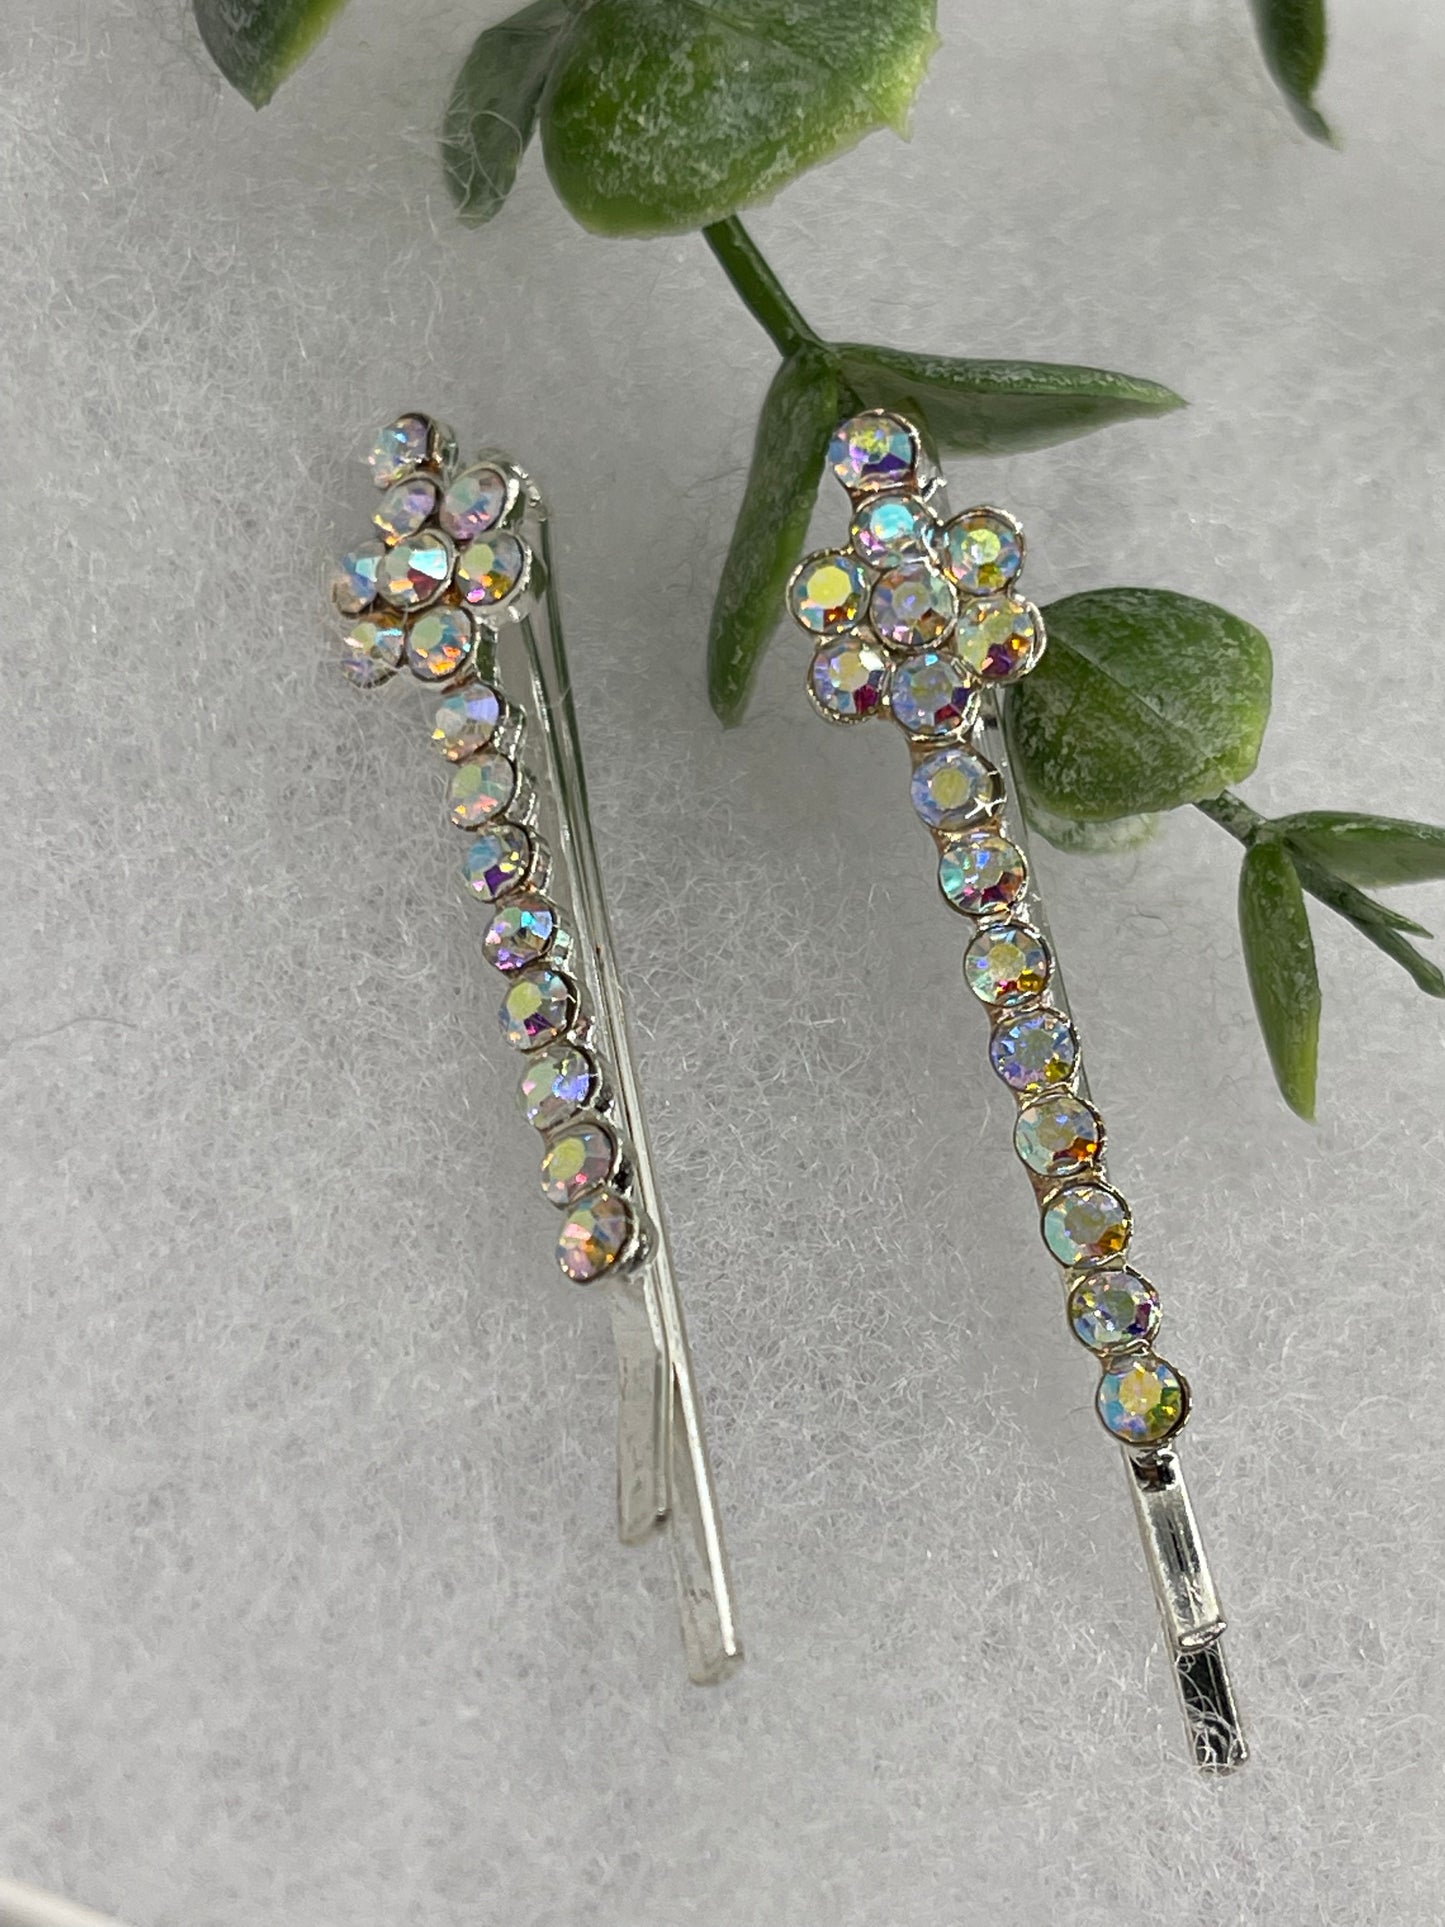 Iridescent crystal rhinestone approximately 2.0” silver tone hair pins 2 pc set wedding bridal shower engagement formal princess accessory accessories